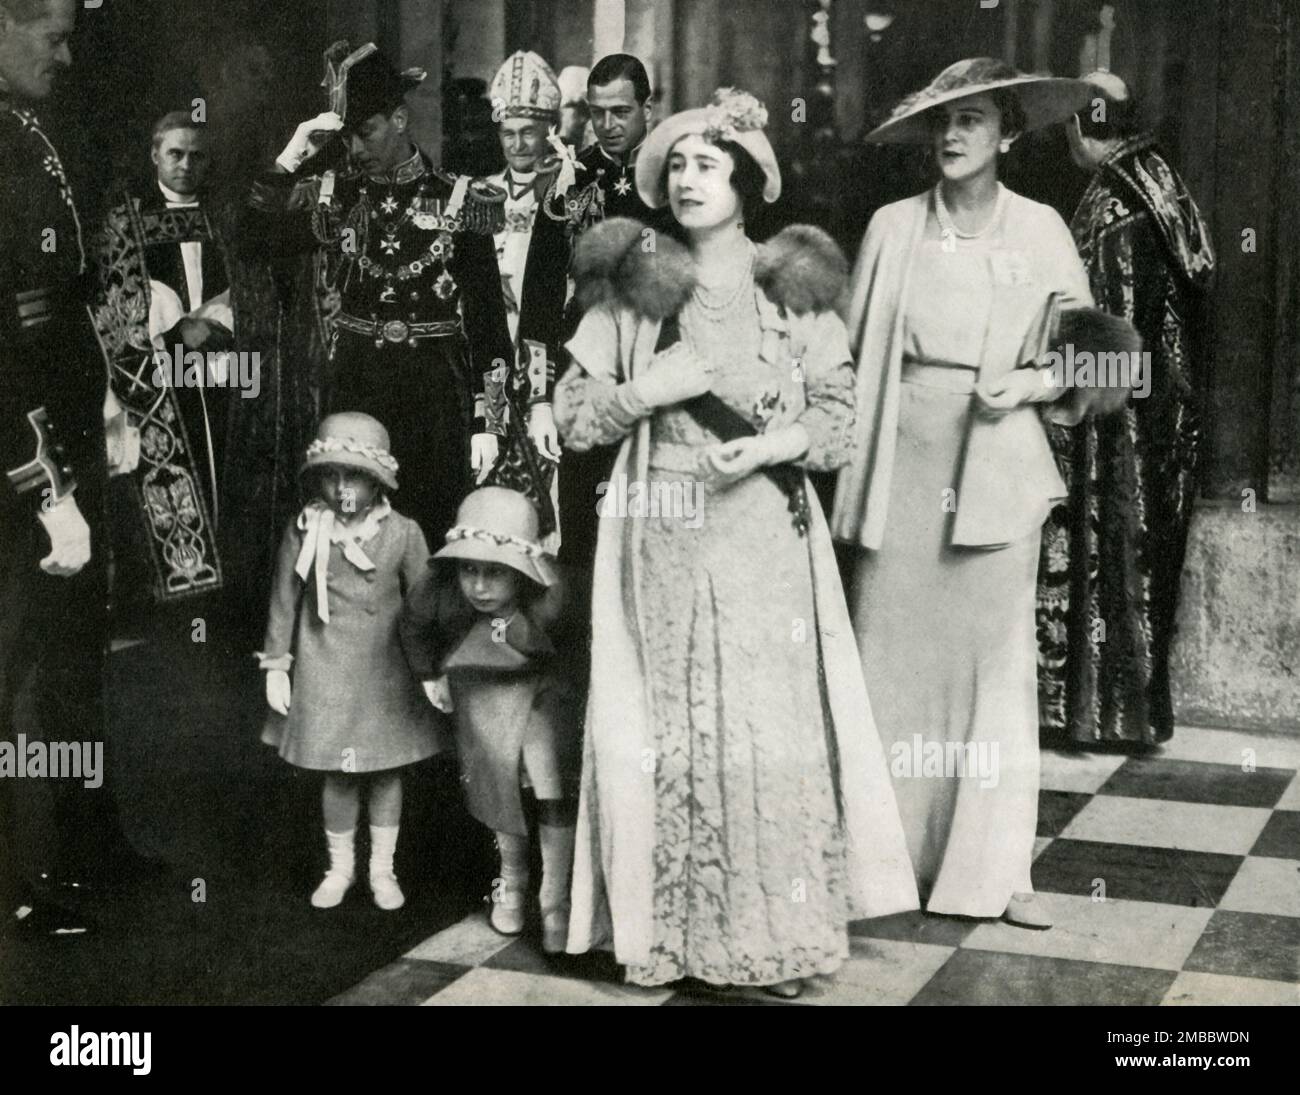 Silver Jubilee of George V and Queen Mary, 6 May 1935, (1947). Service of Thanksgiving at St Paul's Cathedral. The Duke and Duchess of York, (later King George VI and Queen Elizabeth), with Princess Elizabeth (future Queen Elizabeth II) and her younger sister Princess Margaret Rose. Also pictured are the Duke and Duchess of Kent, and the Bishop of London. From &quot;Princess Elizabeth: The Illustrated Story of Twenty-one Years in the Life of the Heir Presumptive&quot;, by Dermot Morrah. [Odhams Press Limited, London, 1947] Stock Photo